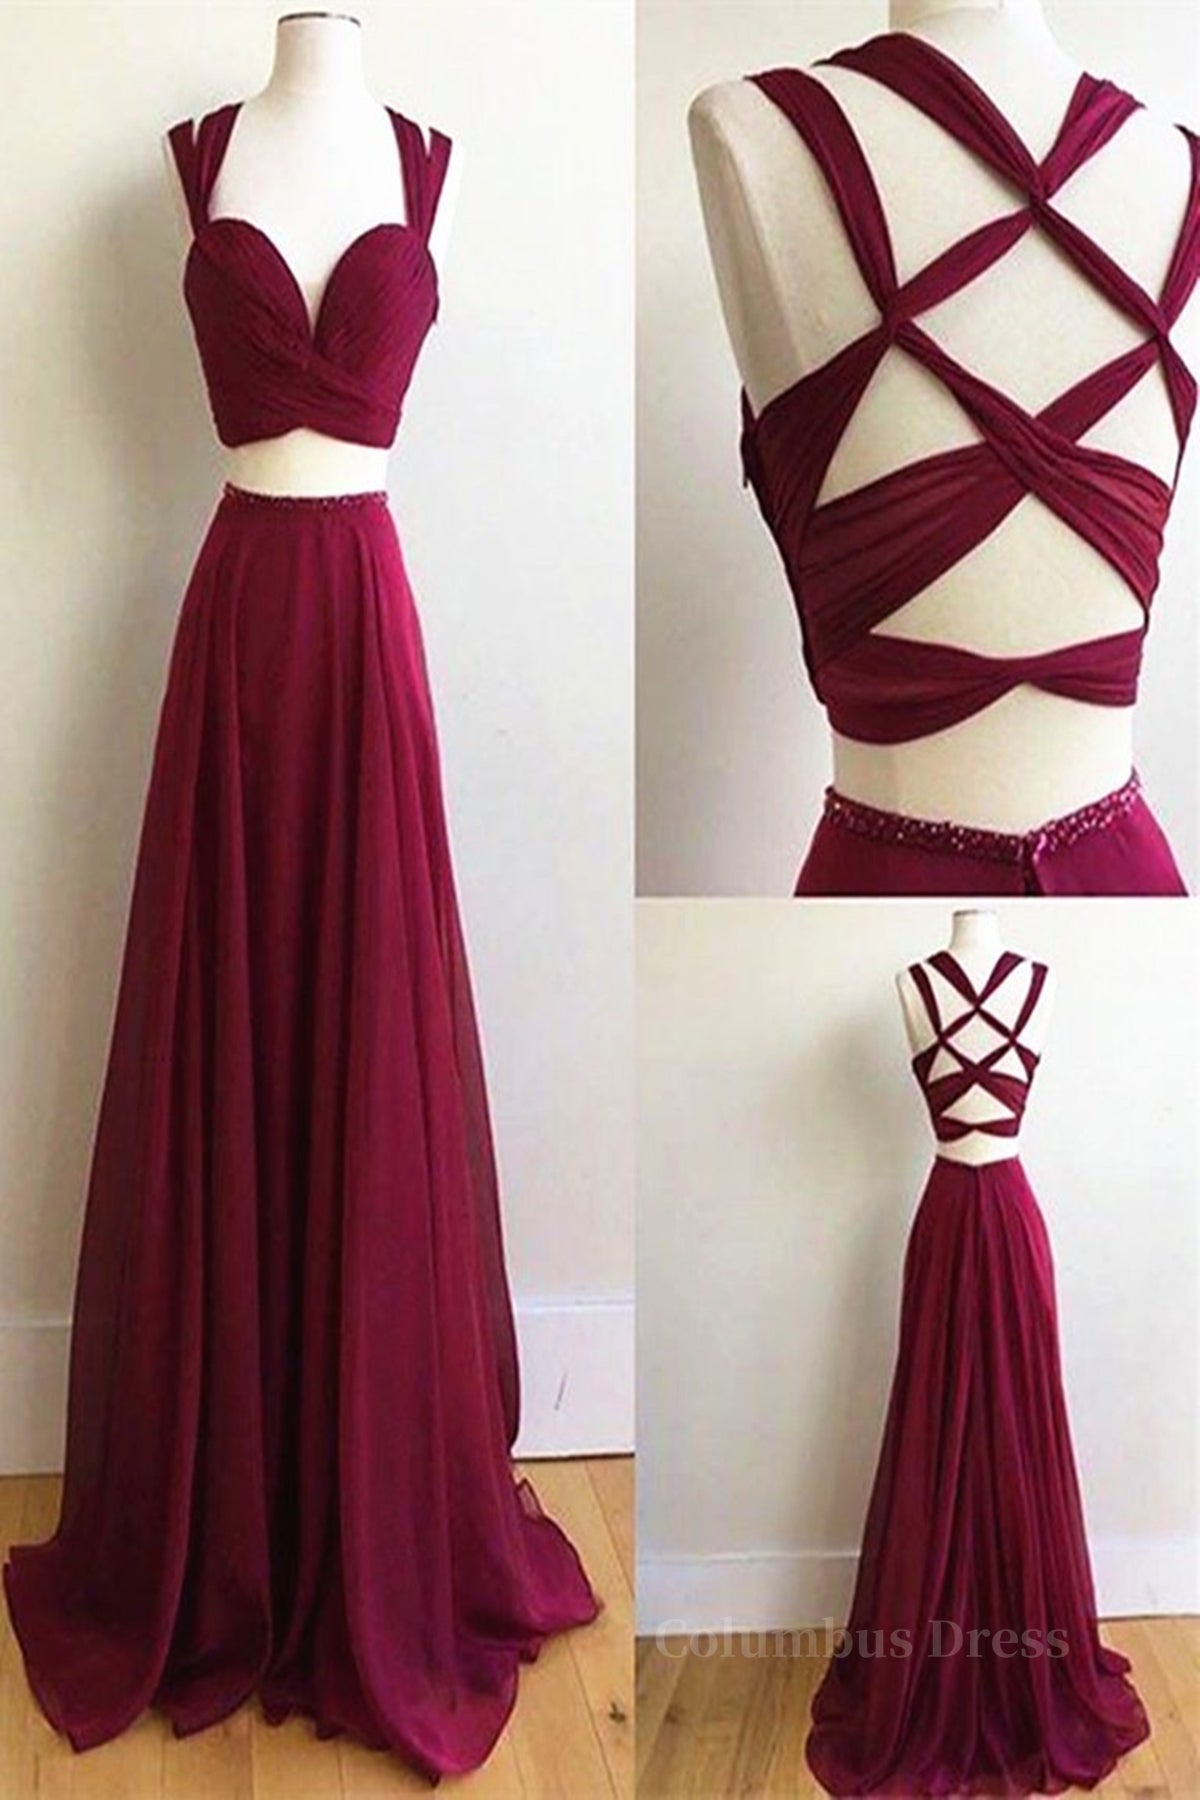 Prom Dress Pink, Two Pieces Burgundy Chiffon Long Prom Dresses, 2 Pieces Wine Red Long Formal Evening Dresses